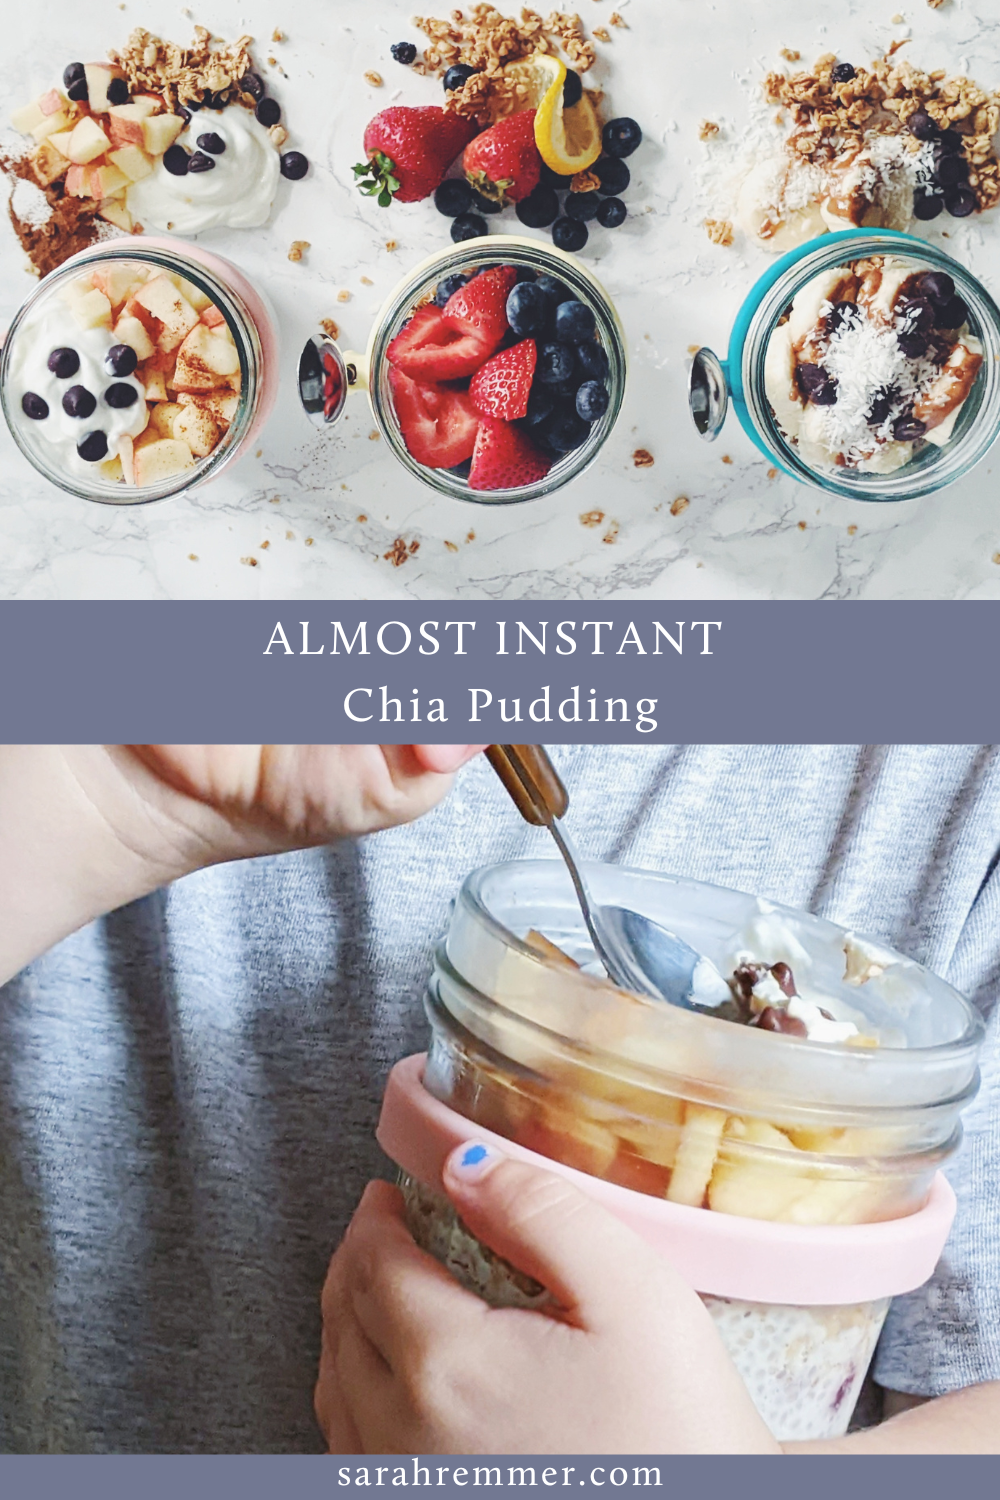 Love chia pudding but hate the overnight (or hours) wait? Wait no more, my friends! This instant chia pudding is ready in around 20 minutes.